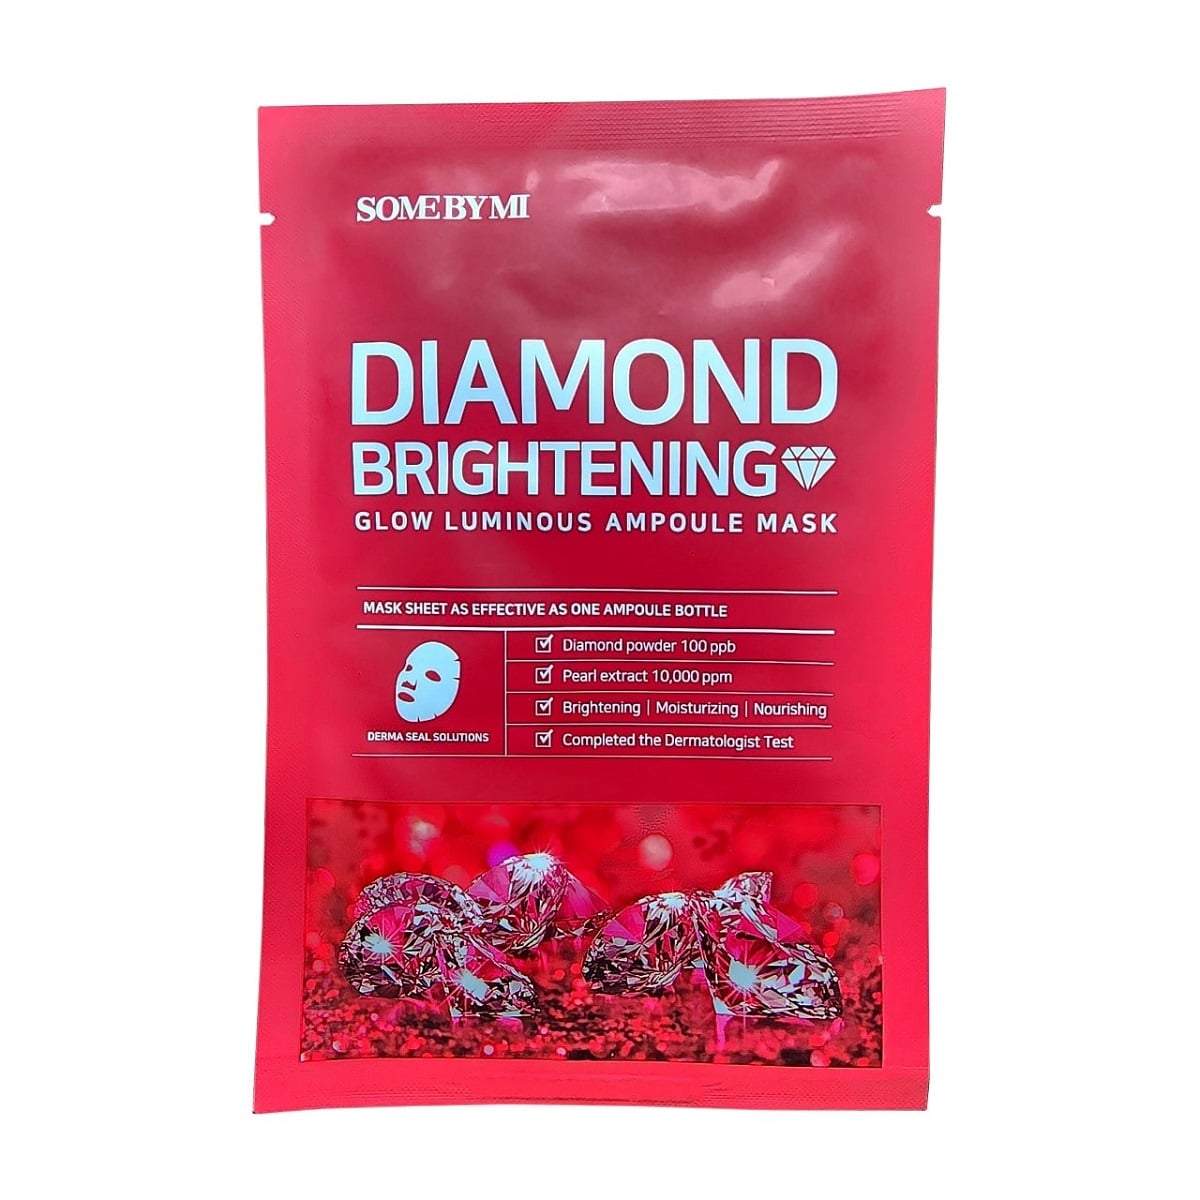 Product label for SOME BY MI Red Diamond Brightening Glow Luminous Ampoule Mask (1 sheet)